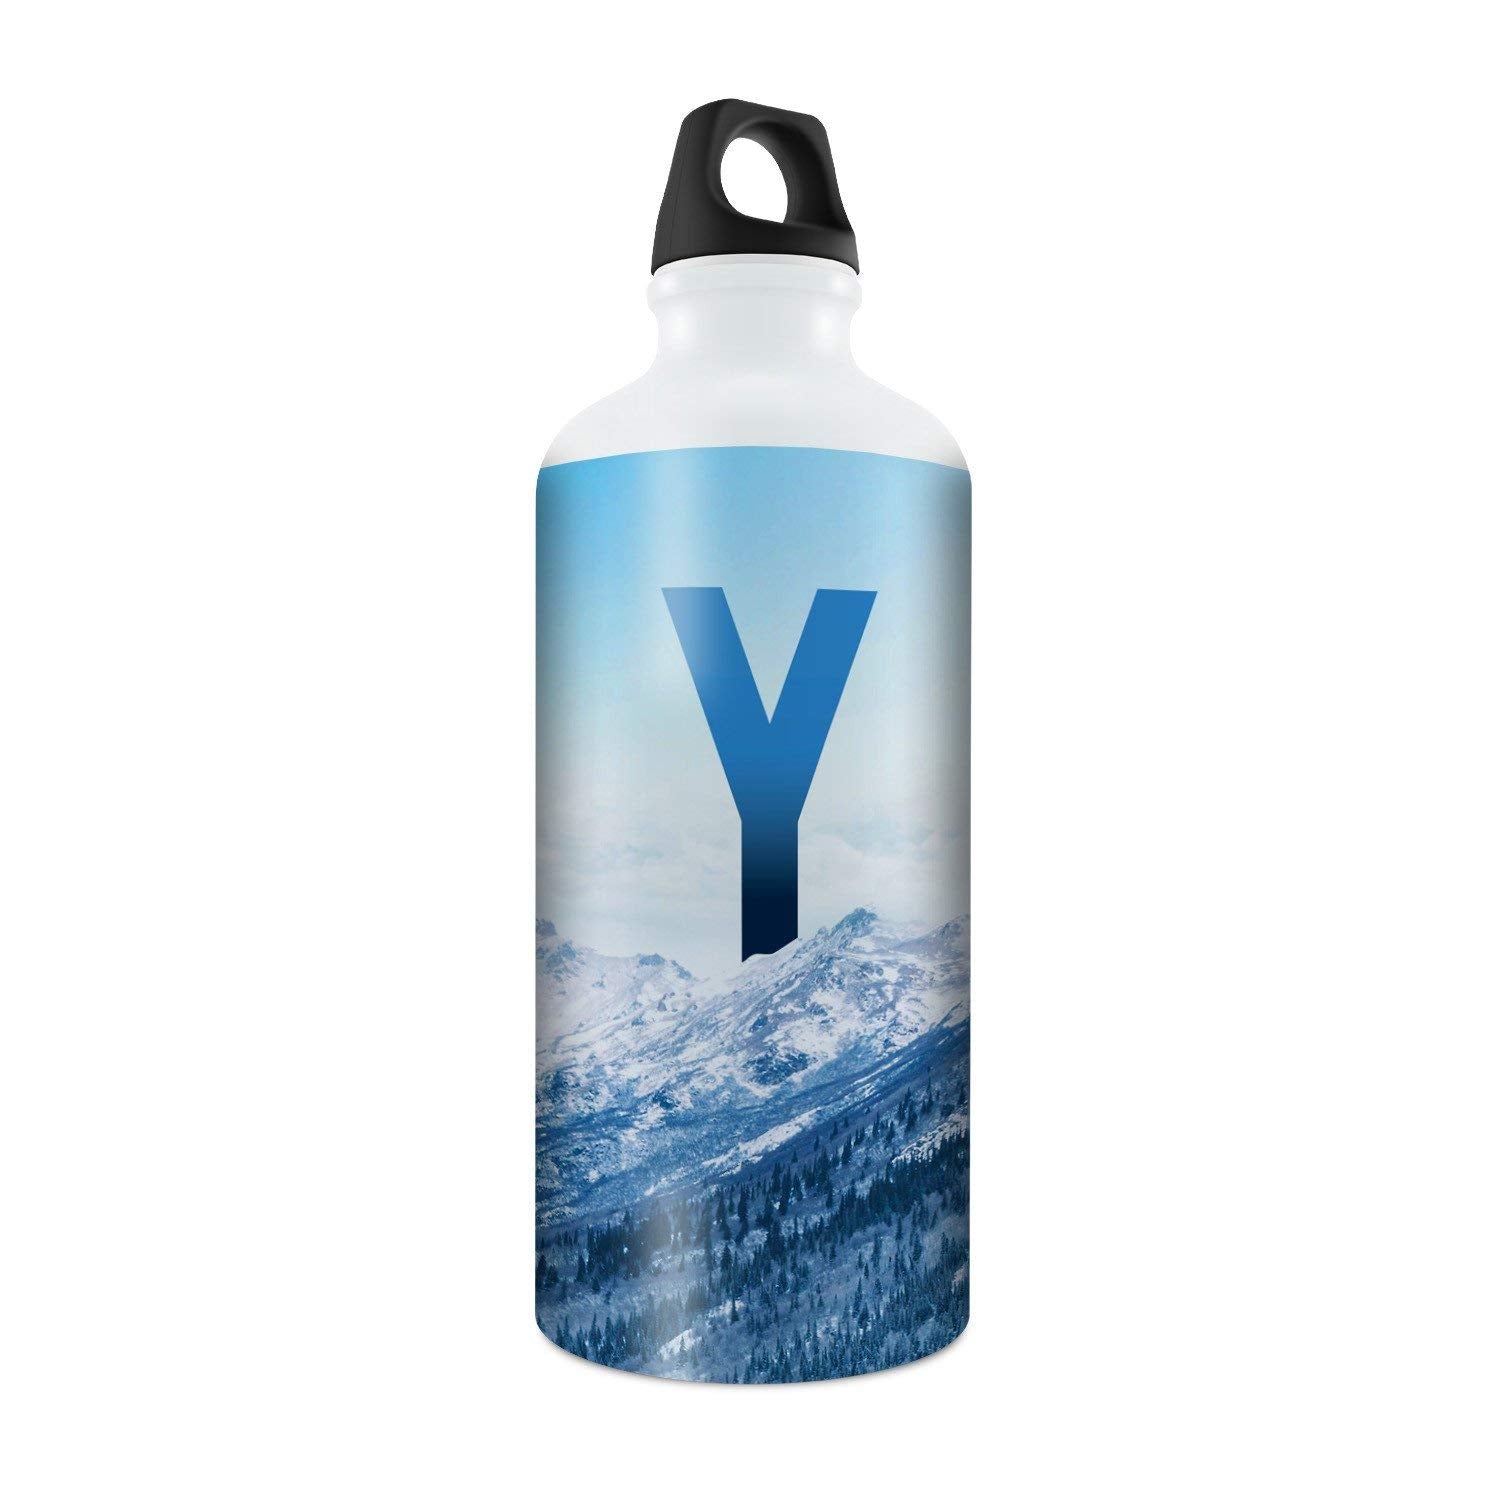 Me Skies Bottle - Personalized Stainless Steel Name Water Bottle, 750ml, 1Pc